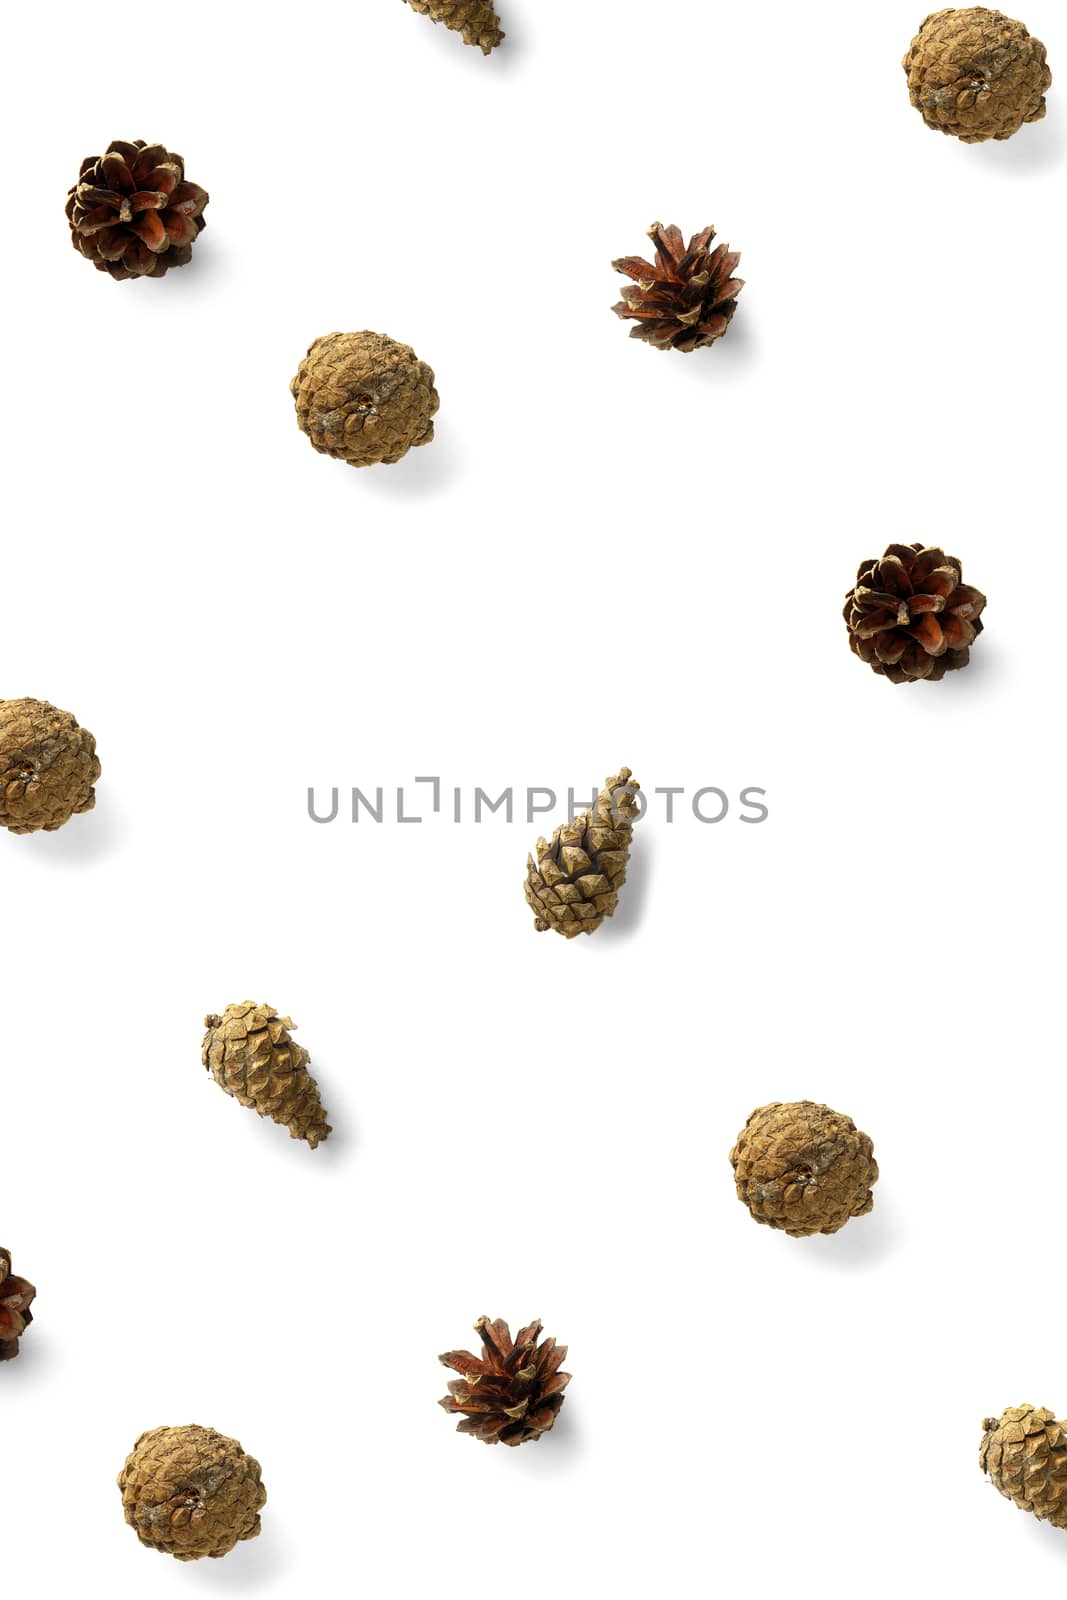 Creative Pine cone Christmas background on white. Pine branches and cones. minimal creative cone arrangement pattern. flat lay, top view. new year background wallpaper. Nature pinecone modern christmas Background